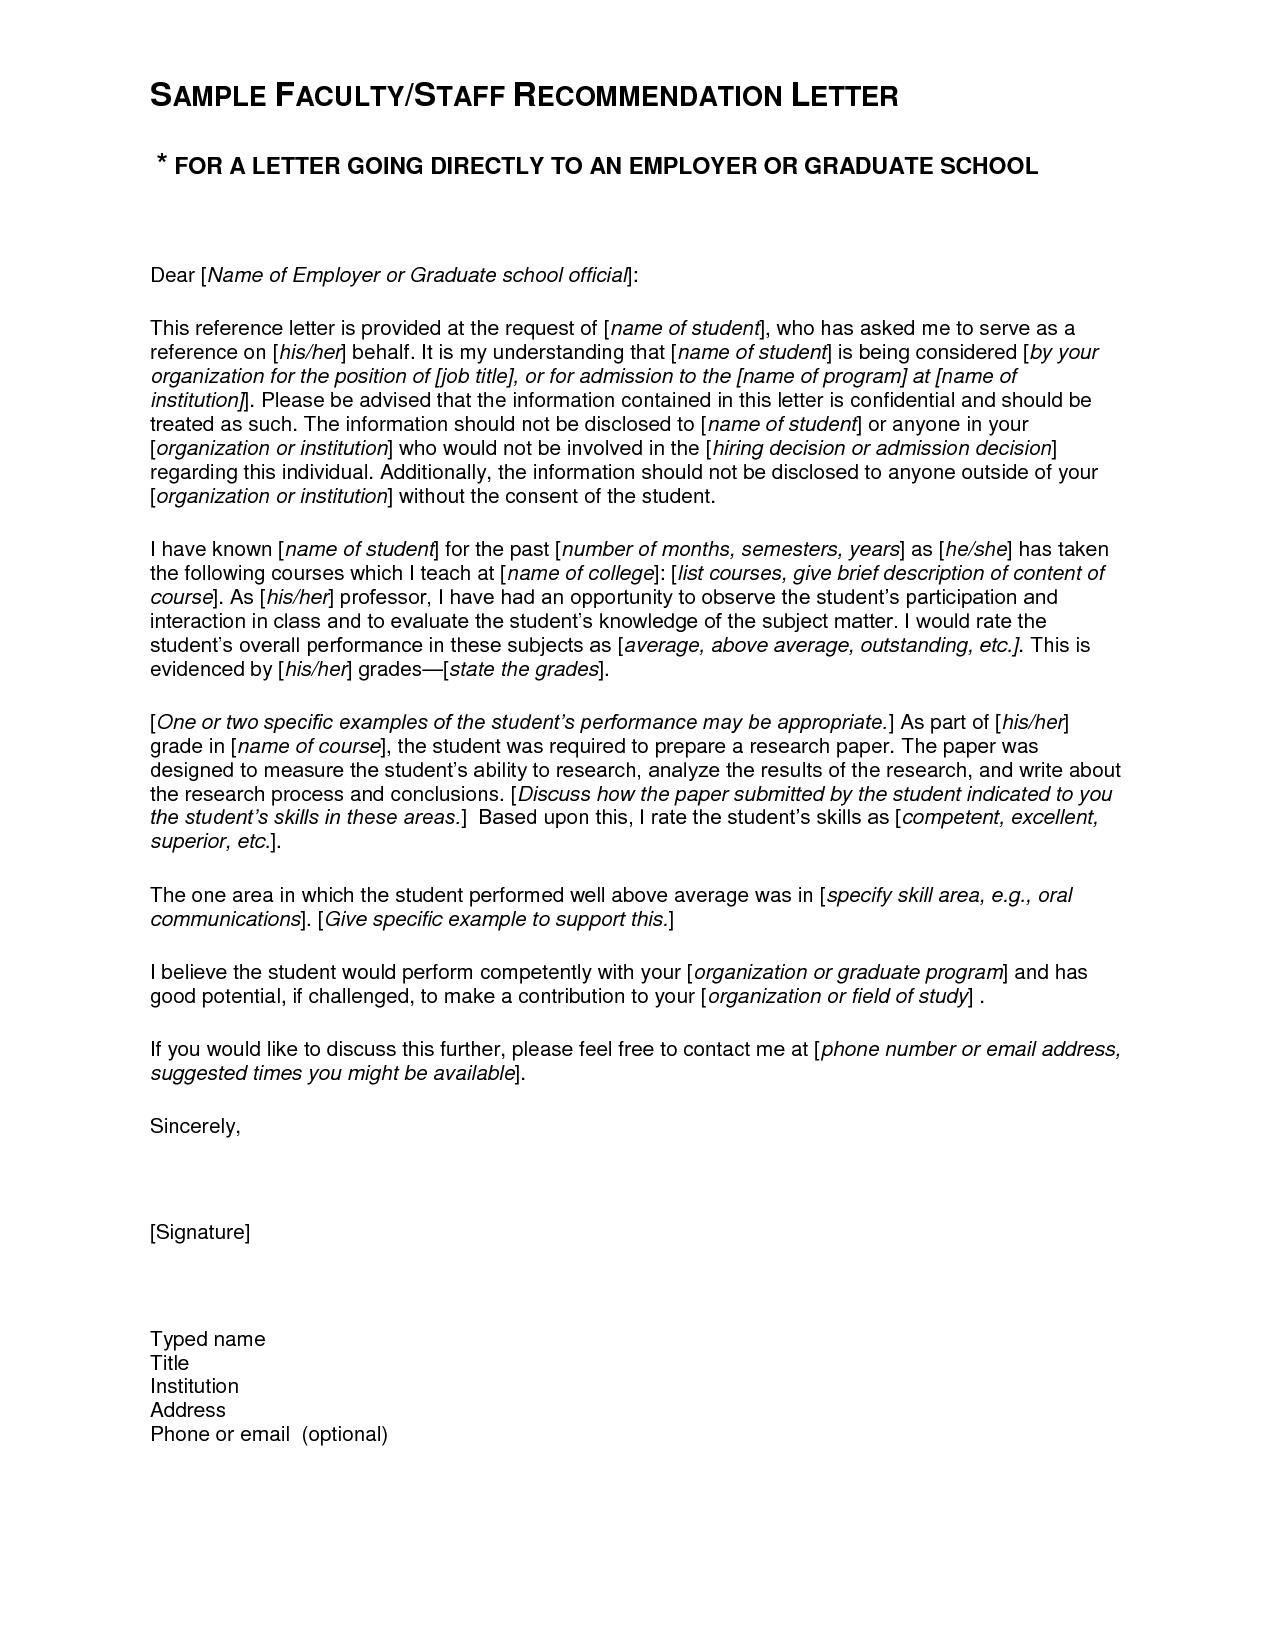 phd student recommendation letter